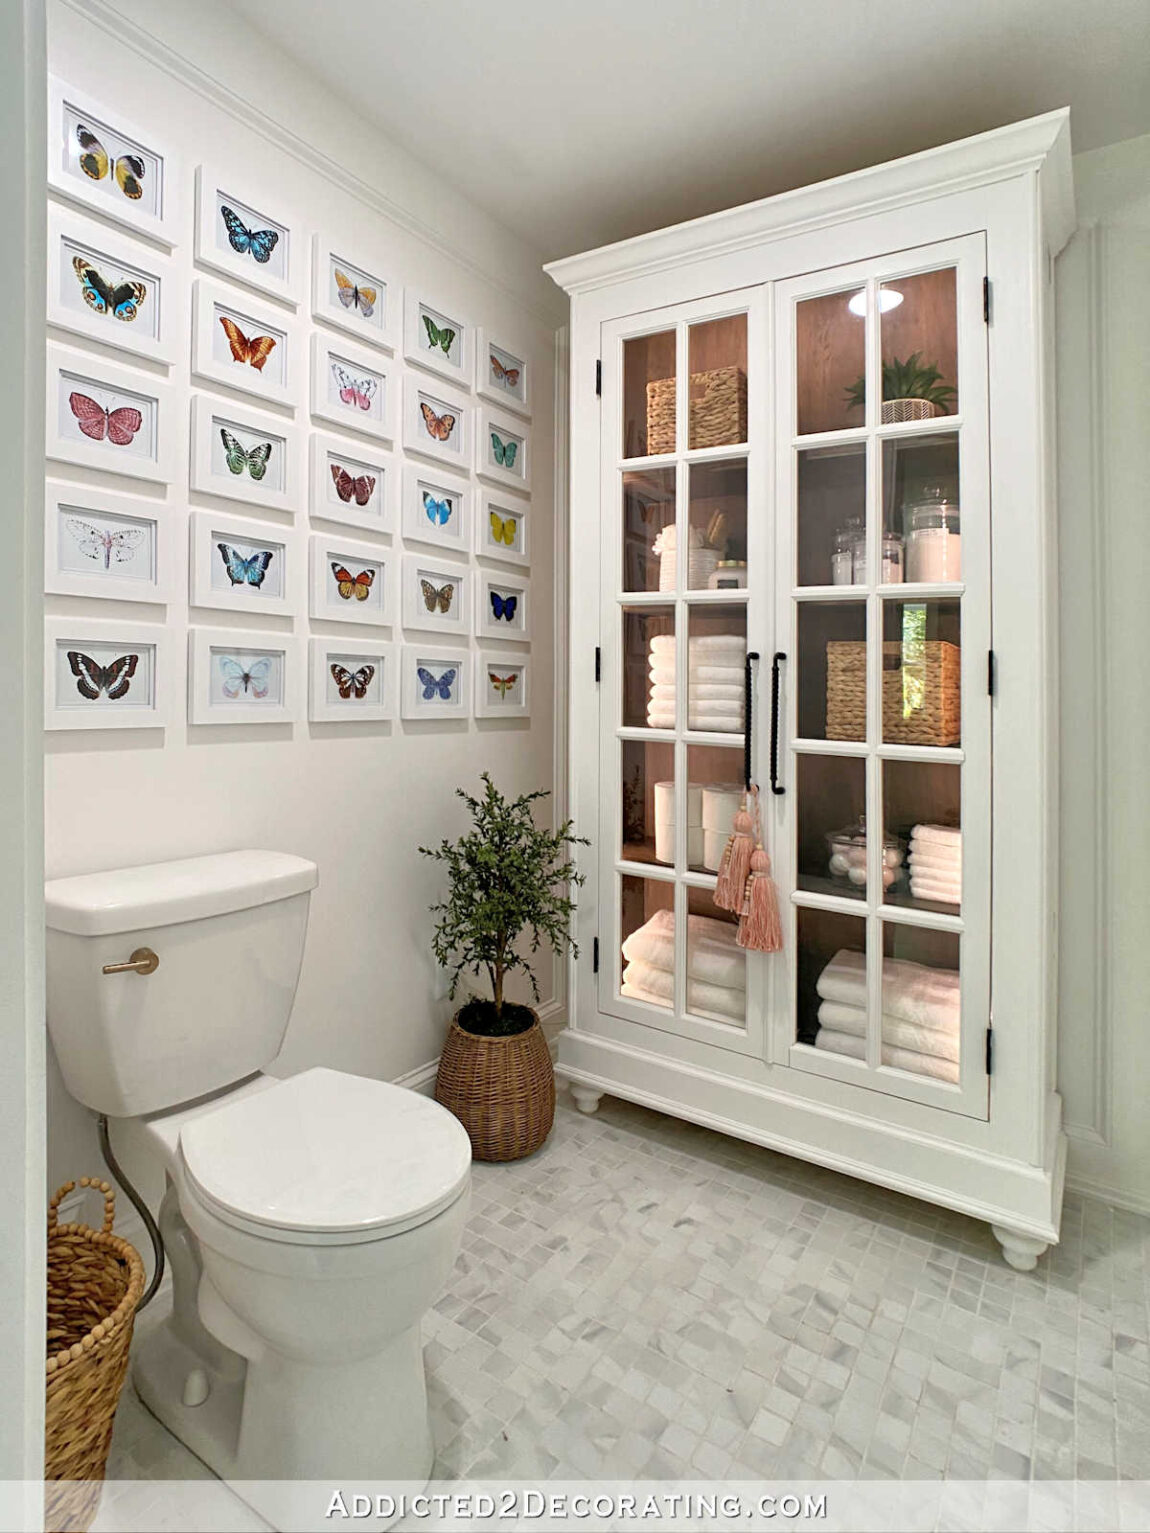 Water closet area of master bathroom with large storage cabinet with stained interior and LED lights, grid gallery wall with butterfly illustrations